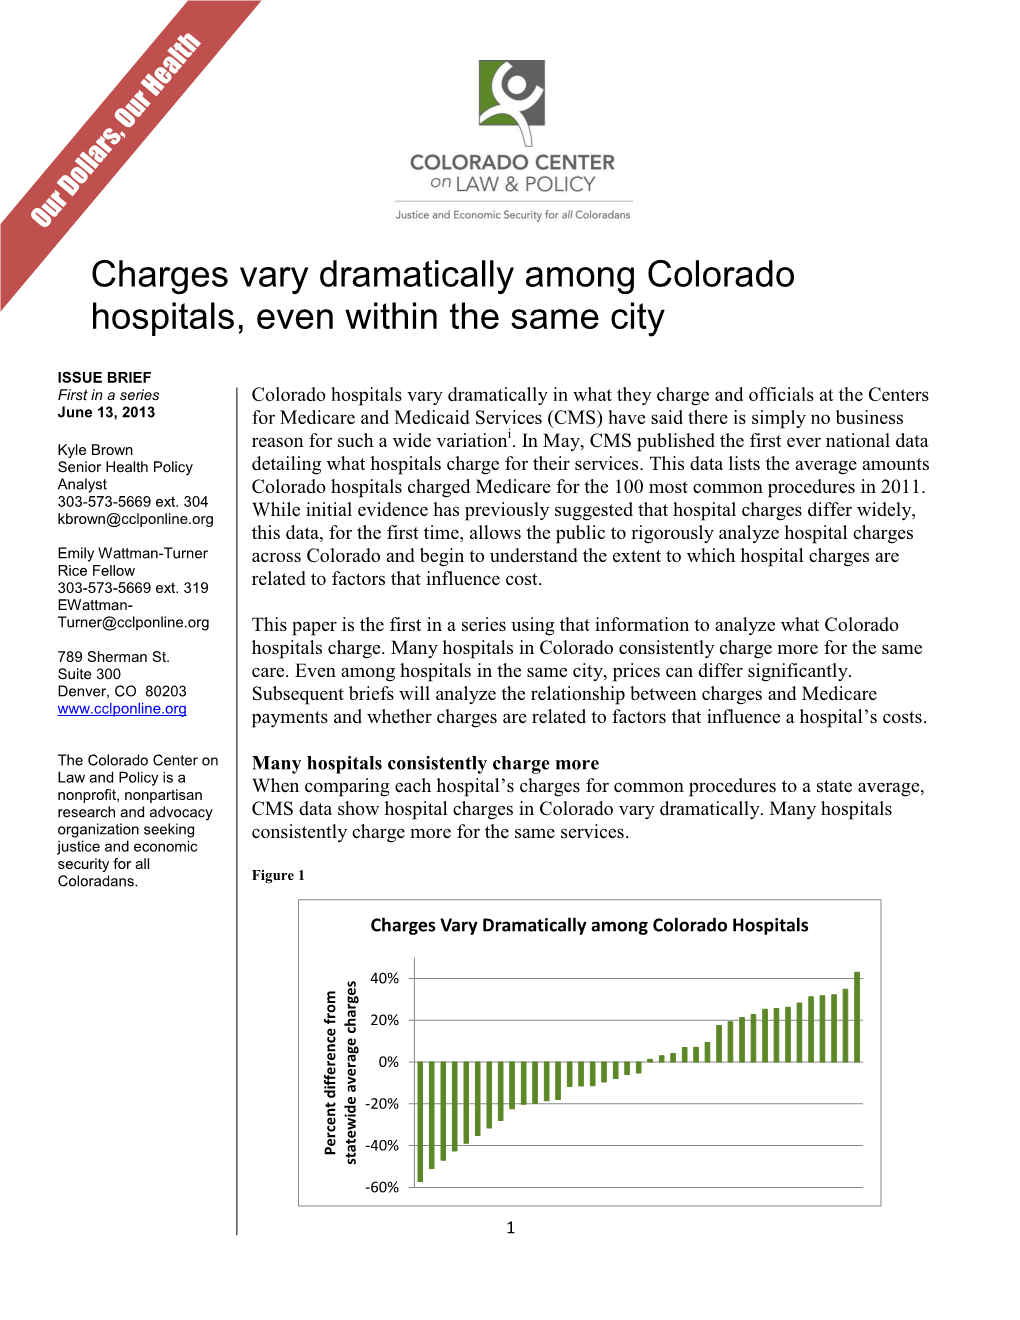 Charges Vary Dramatically Among Colorado Hospitals, Even Within the Same City